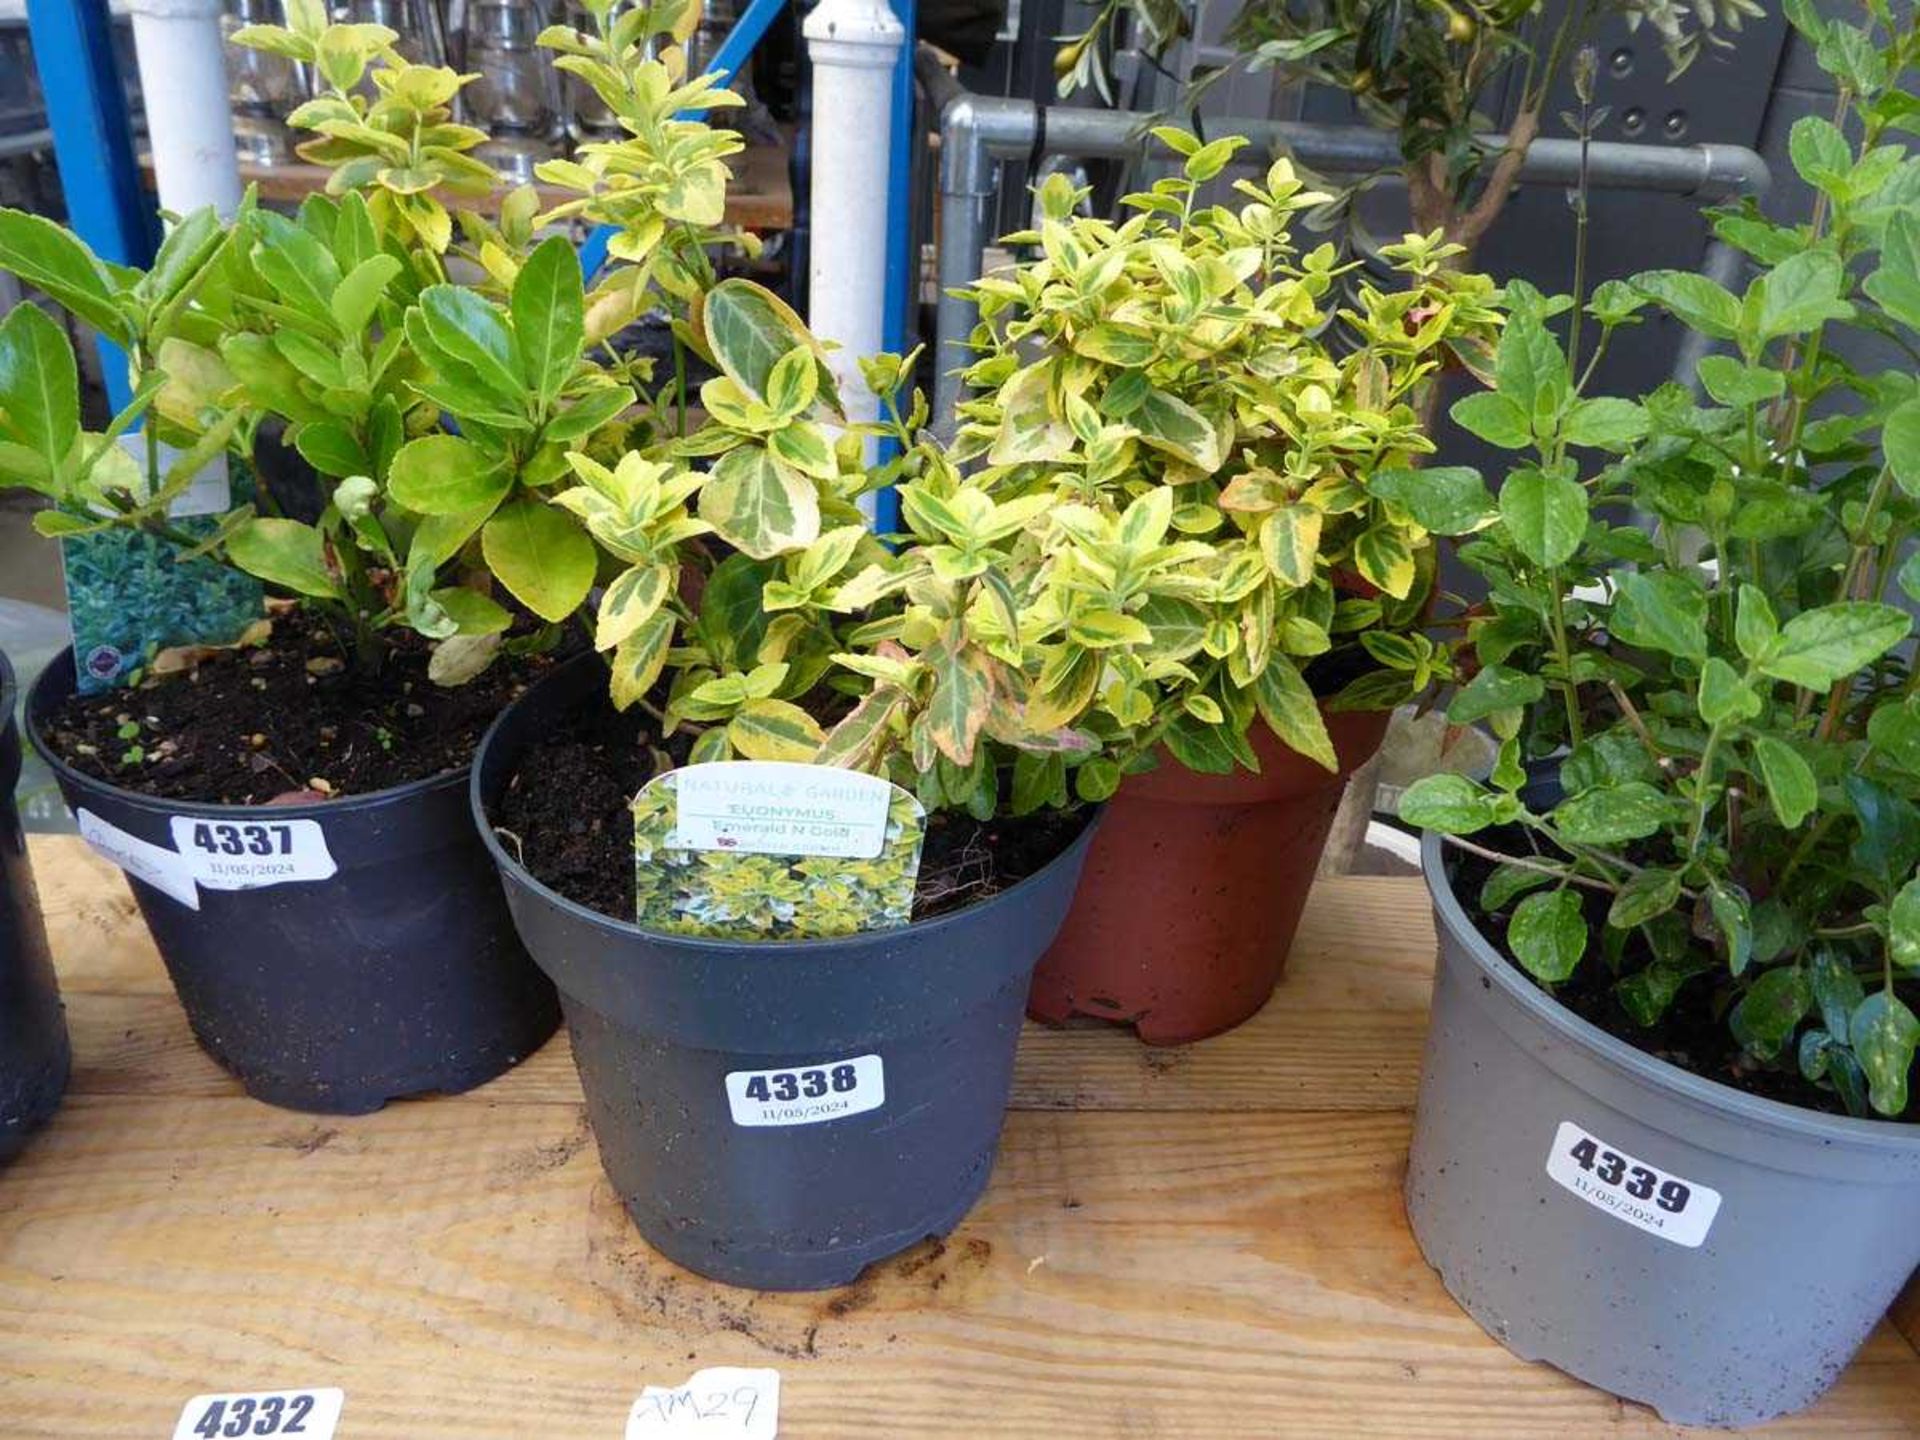 Two potted Euonymus plants